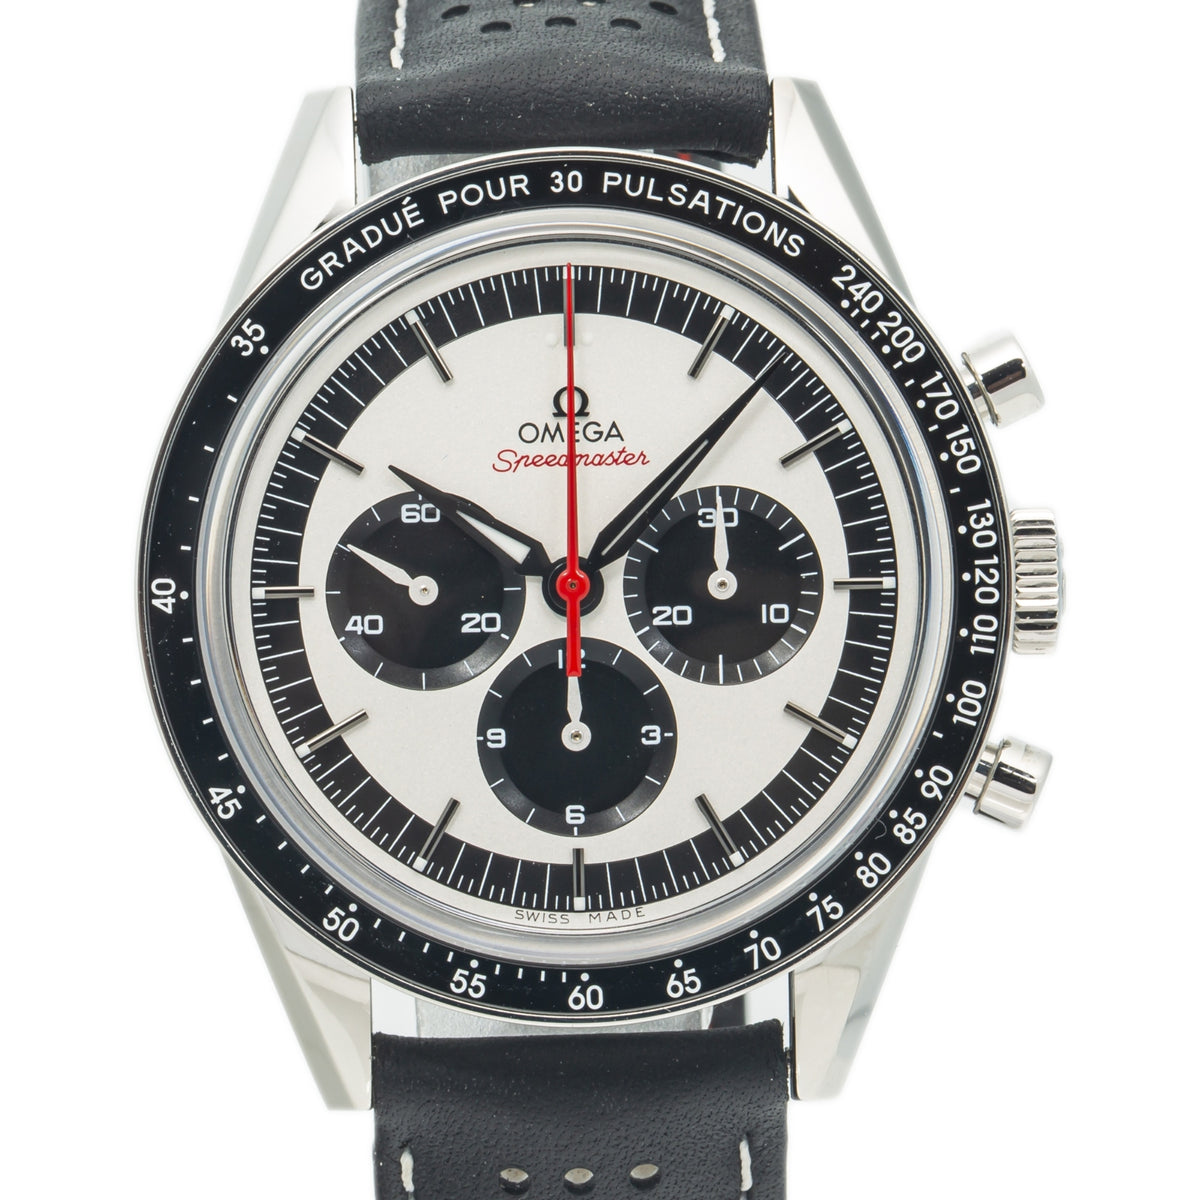 Omega Speedmaster 311.32.40.30.02.001 Moonwatch Limited CK2998 Pulso Watch 40mm